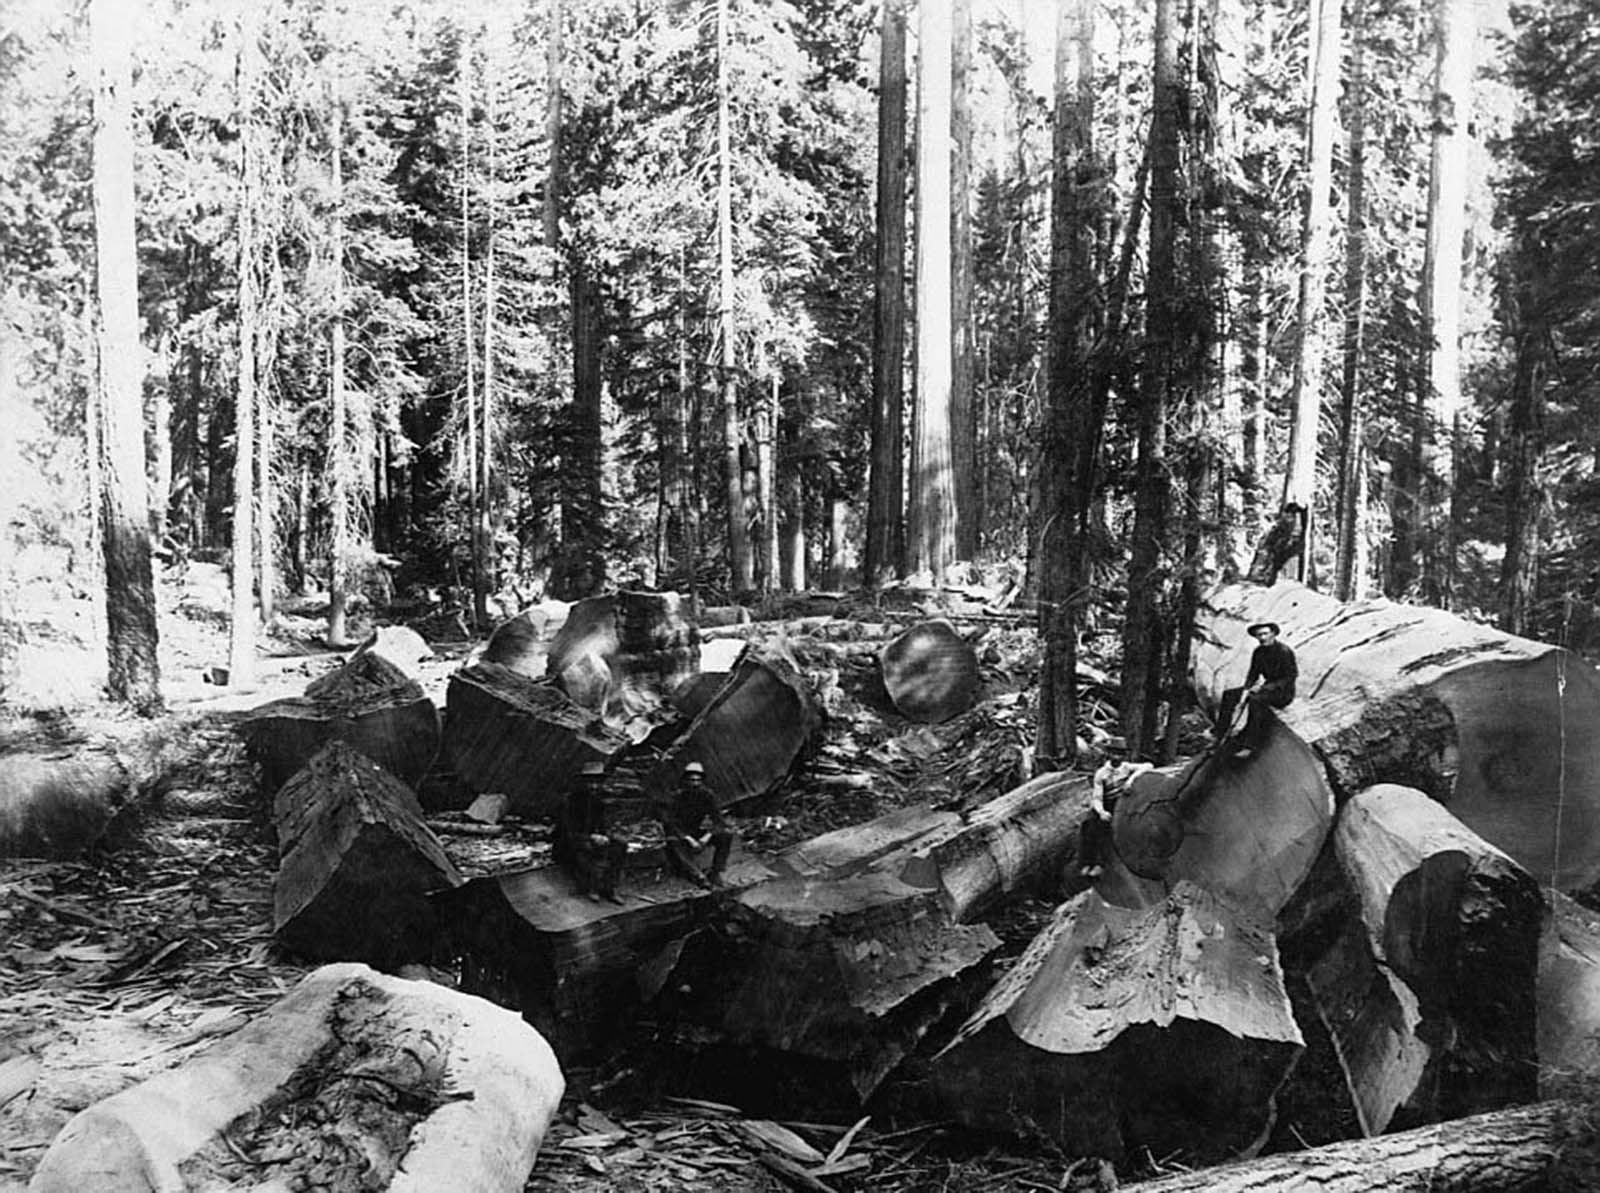 Lumberjacks sit on chunks of trees that they chopped down while looking around at the remaining forest surrounding them.